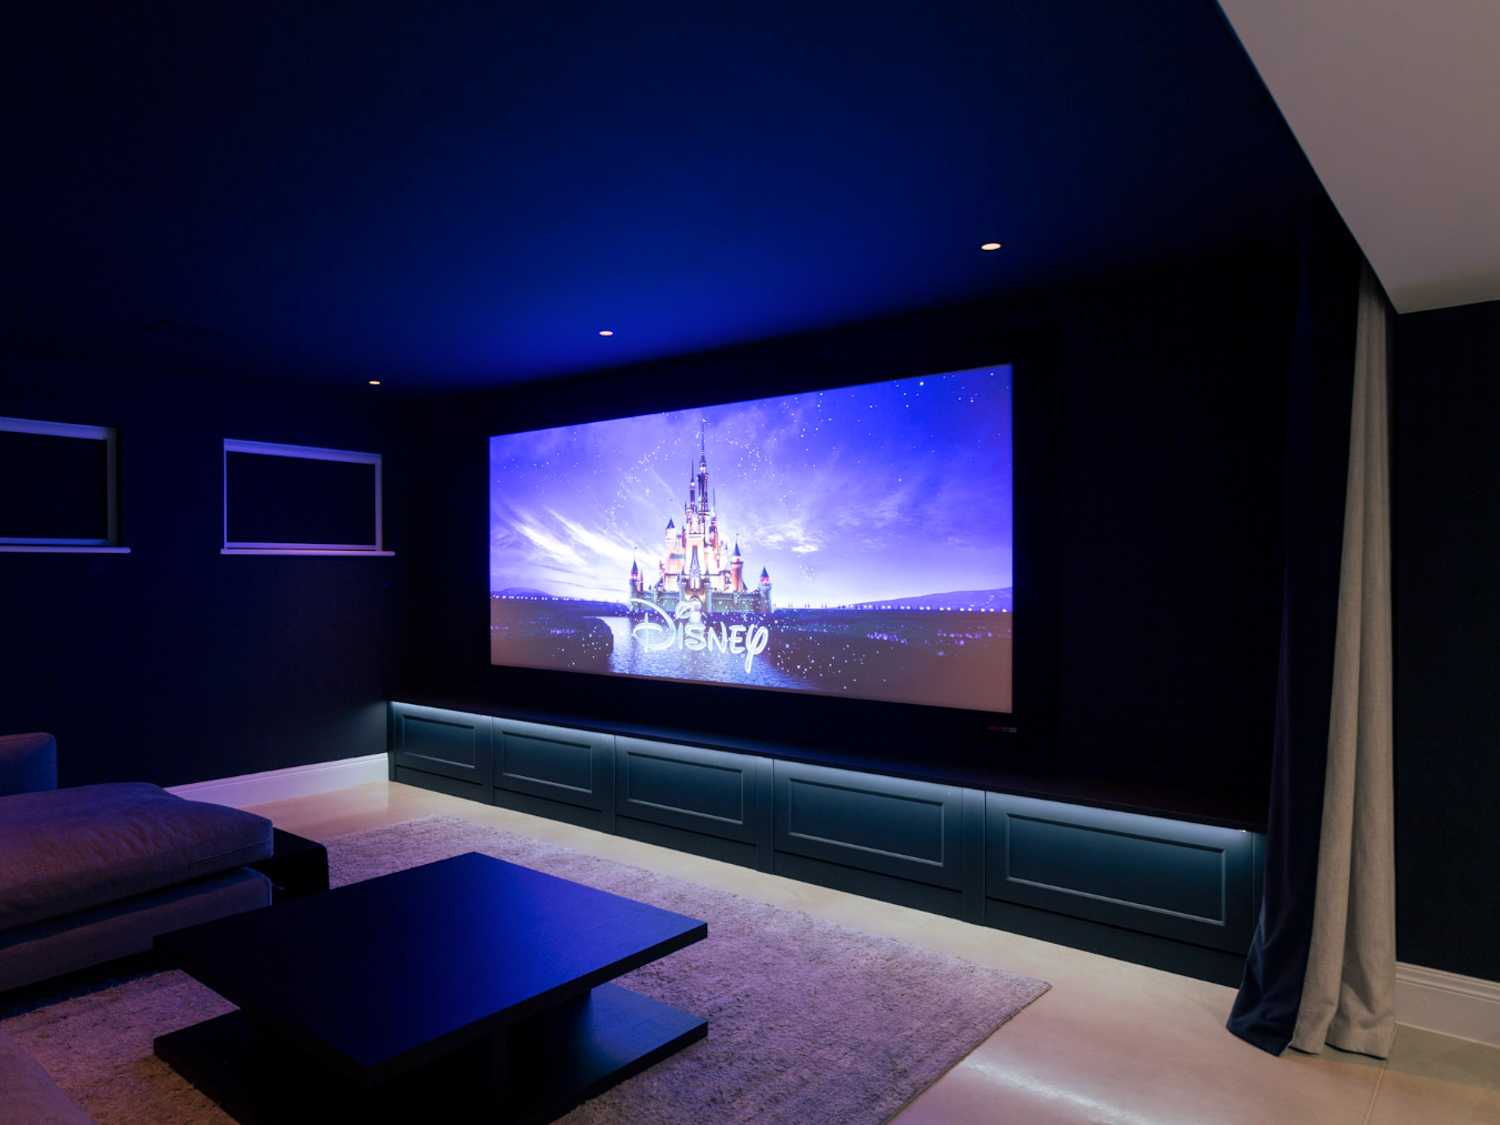 Luxury home cinema that can compete in performance for many commercial cinemas